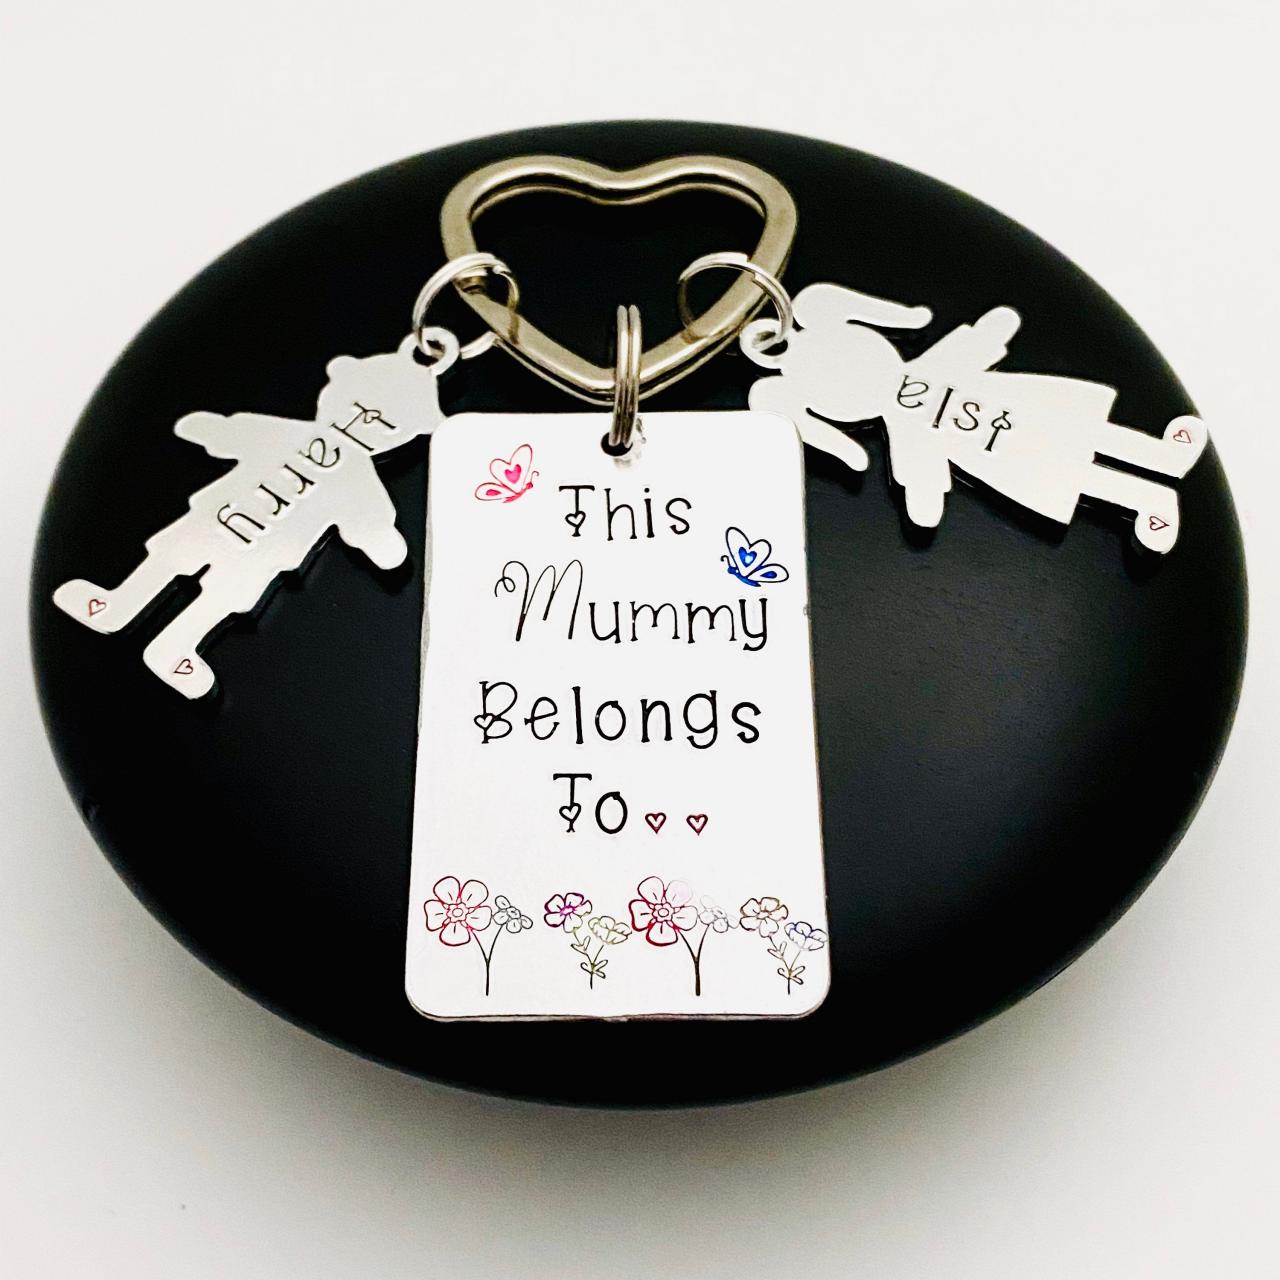 This Mummy Belongs To Keyring, Personalised Mummy Gift, Family Tree, Mummy Gift, Gift Off The Kids, Gift For Her, Personalized Mom Gift..